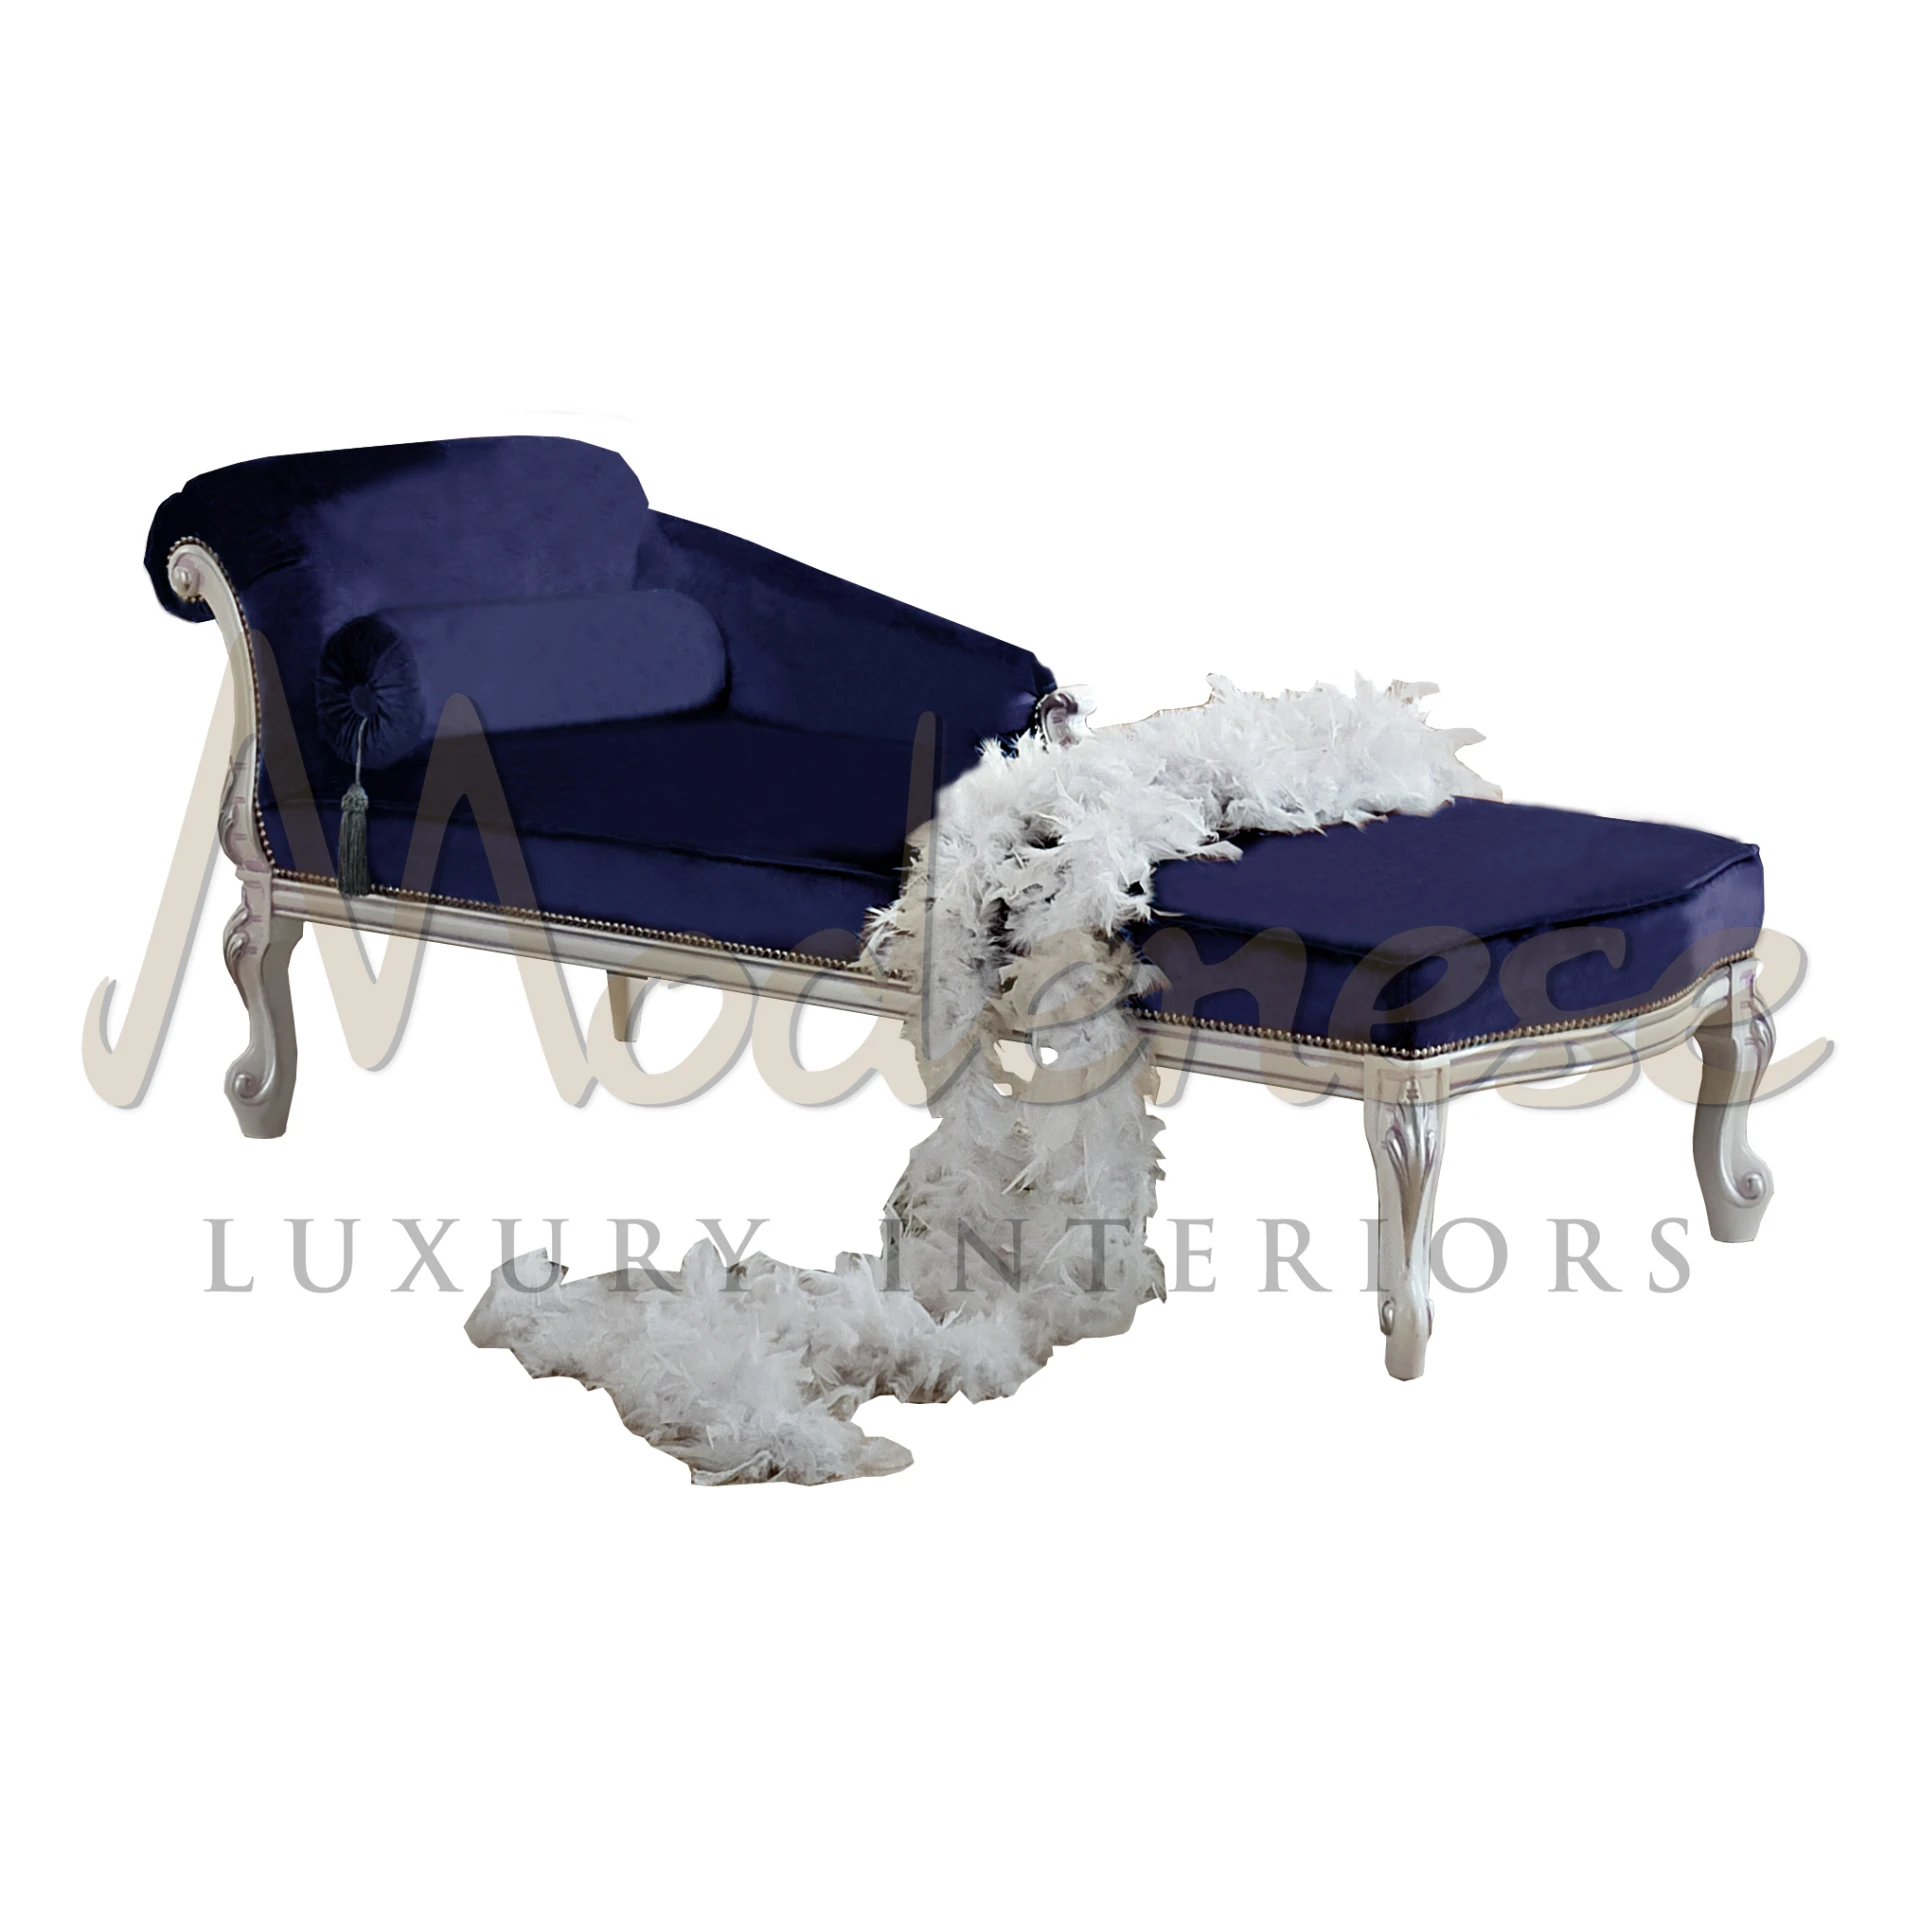 Royal blue velvet chaise lounge with white carved wood frame.                                                                                             